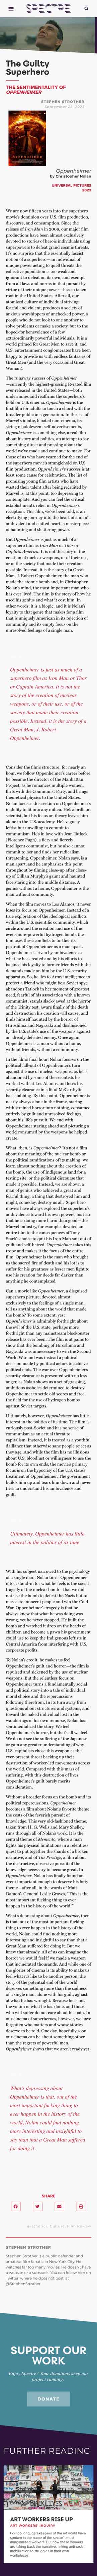 A sample article from Spectre's website, as it appears on mobile devices. Up top is a large 